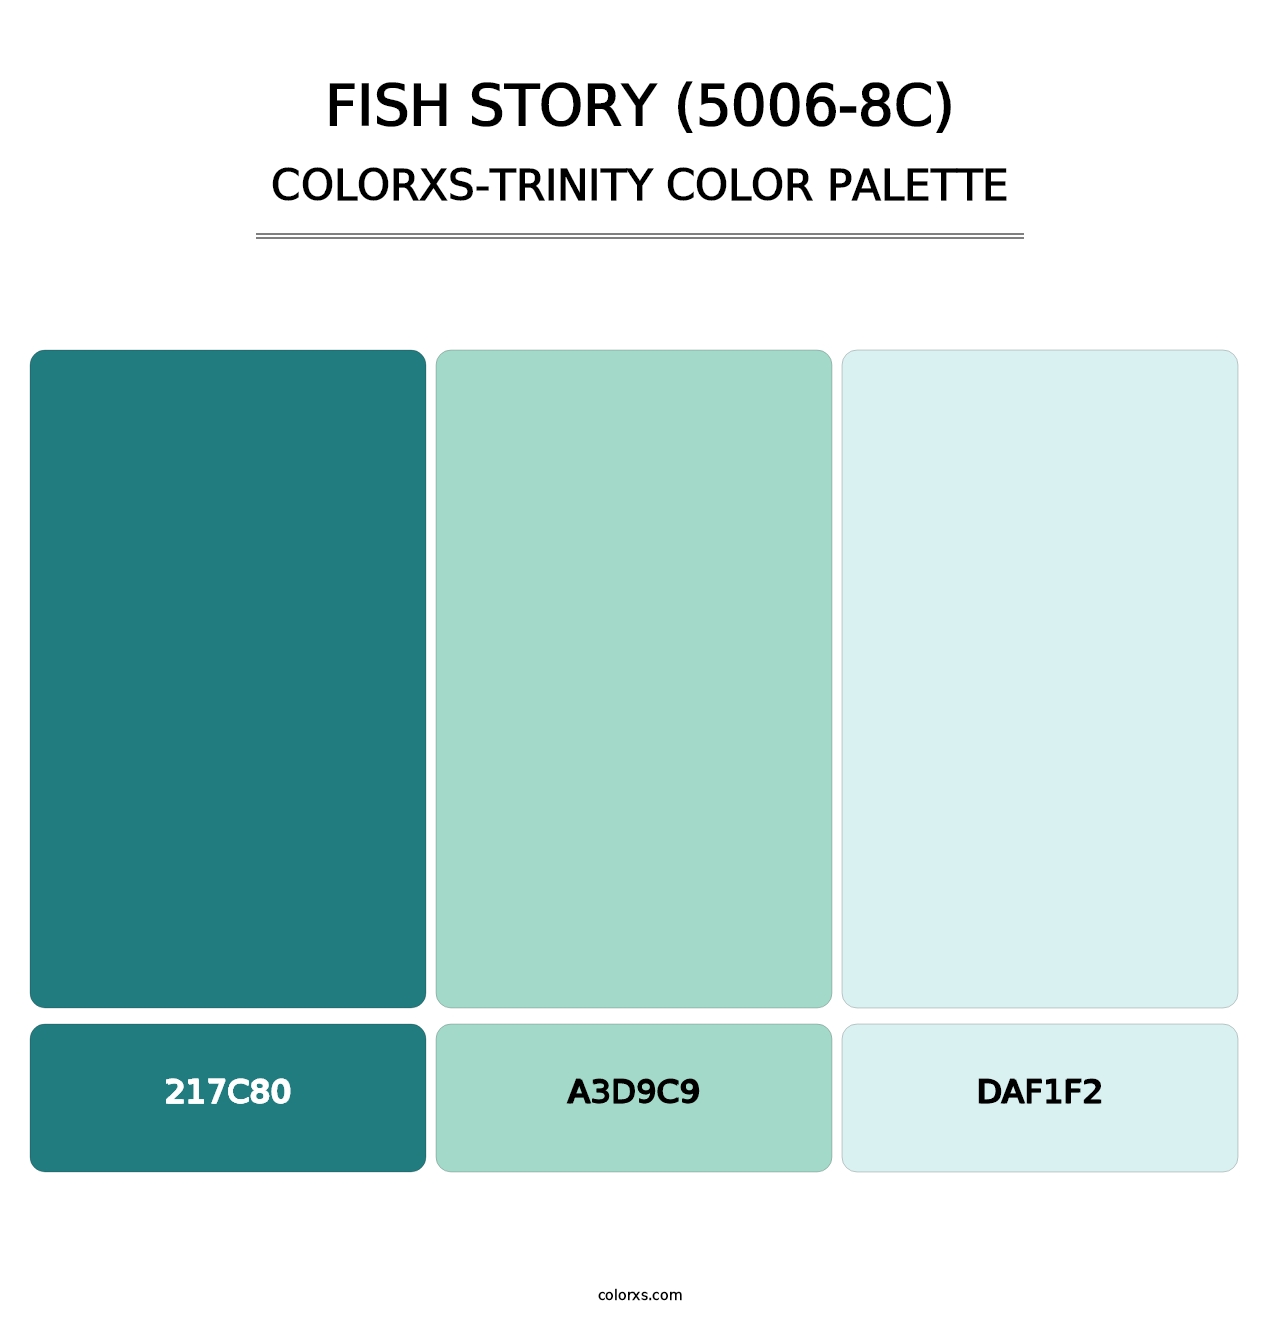 Fish Story (5006-8C) - Colorxs Trinity Palette